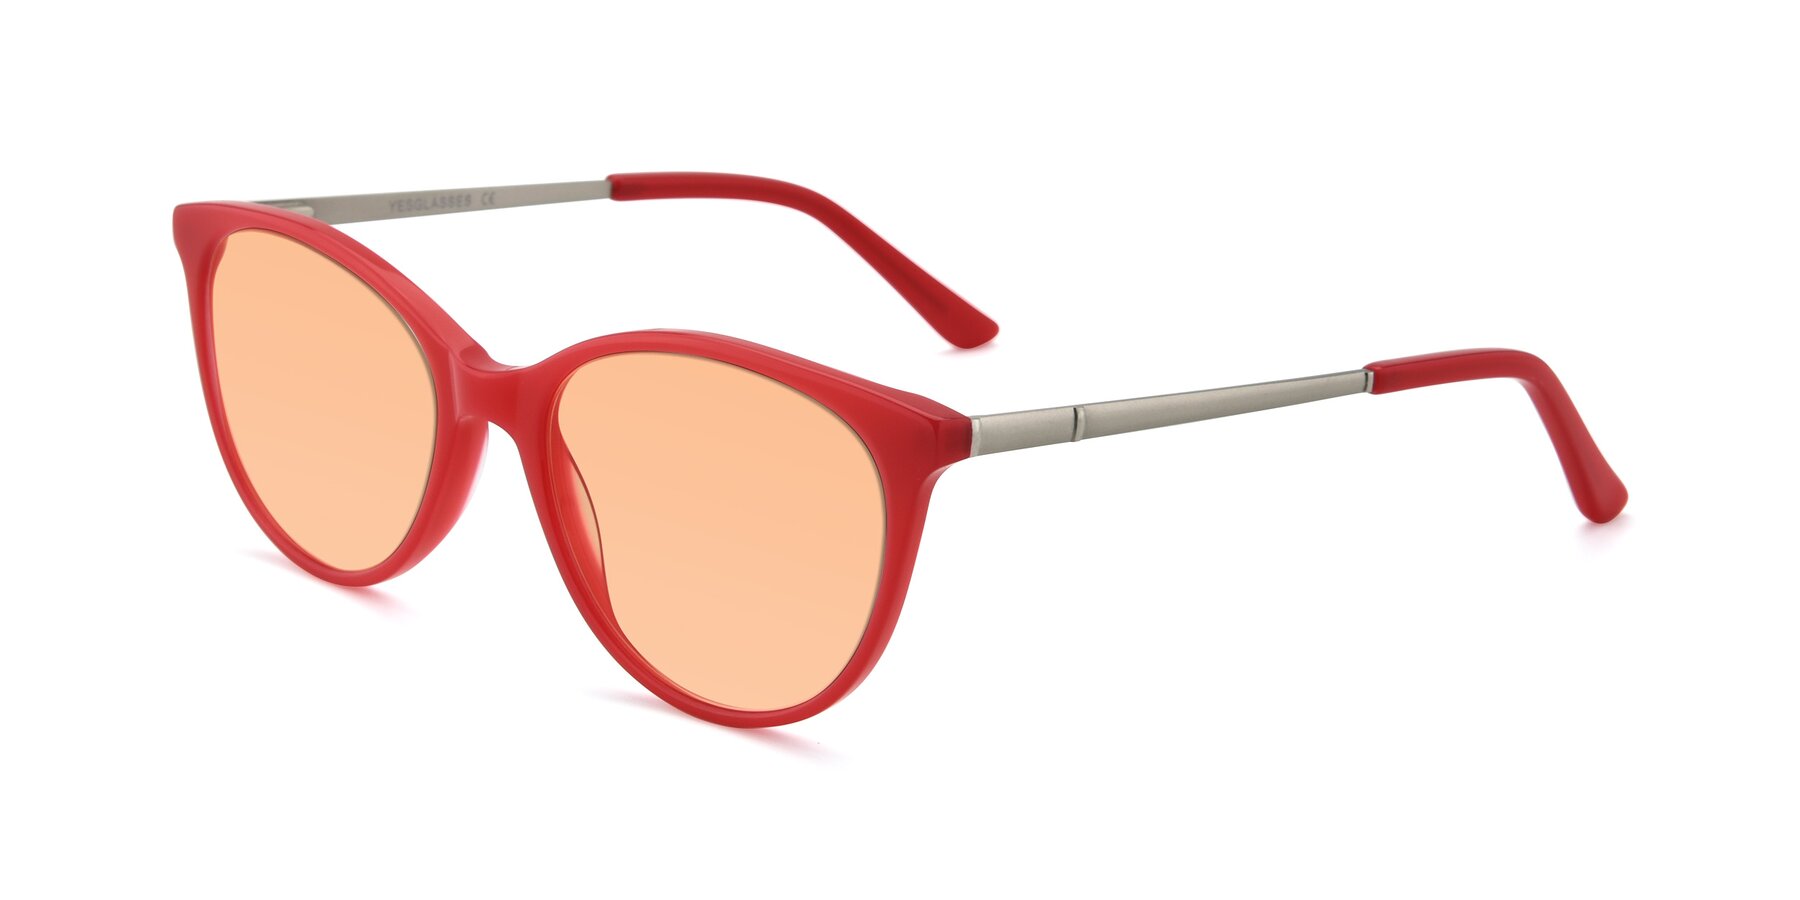 Angle of SR6062 in Rose with Light Orange Tinted Lenses